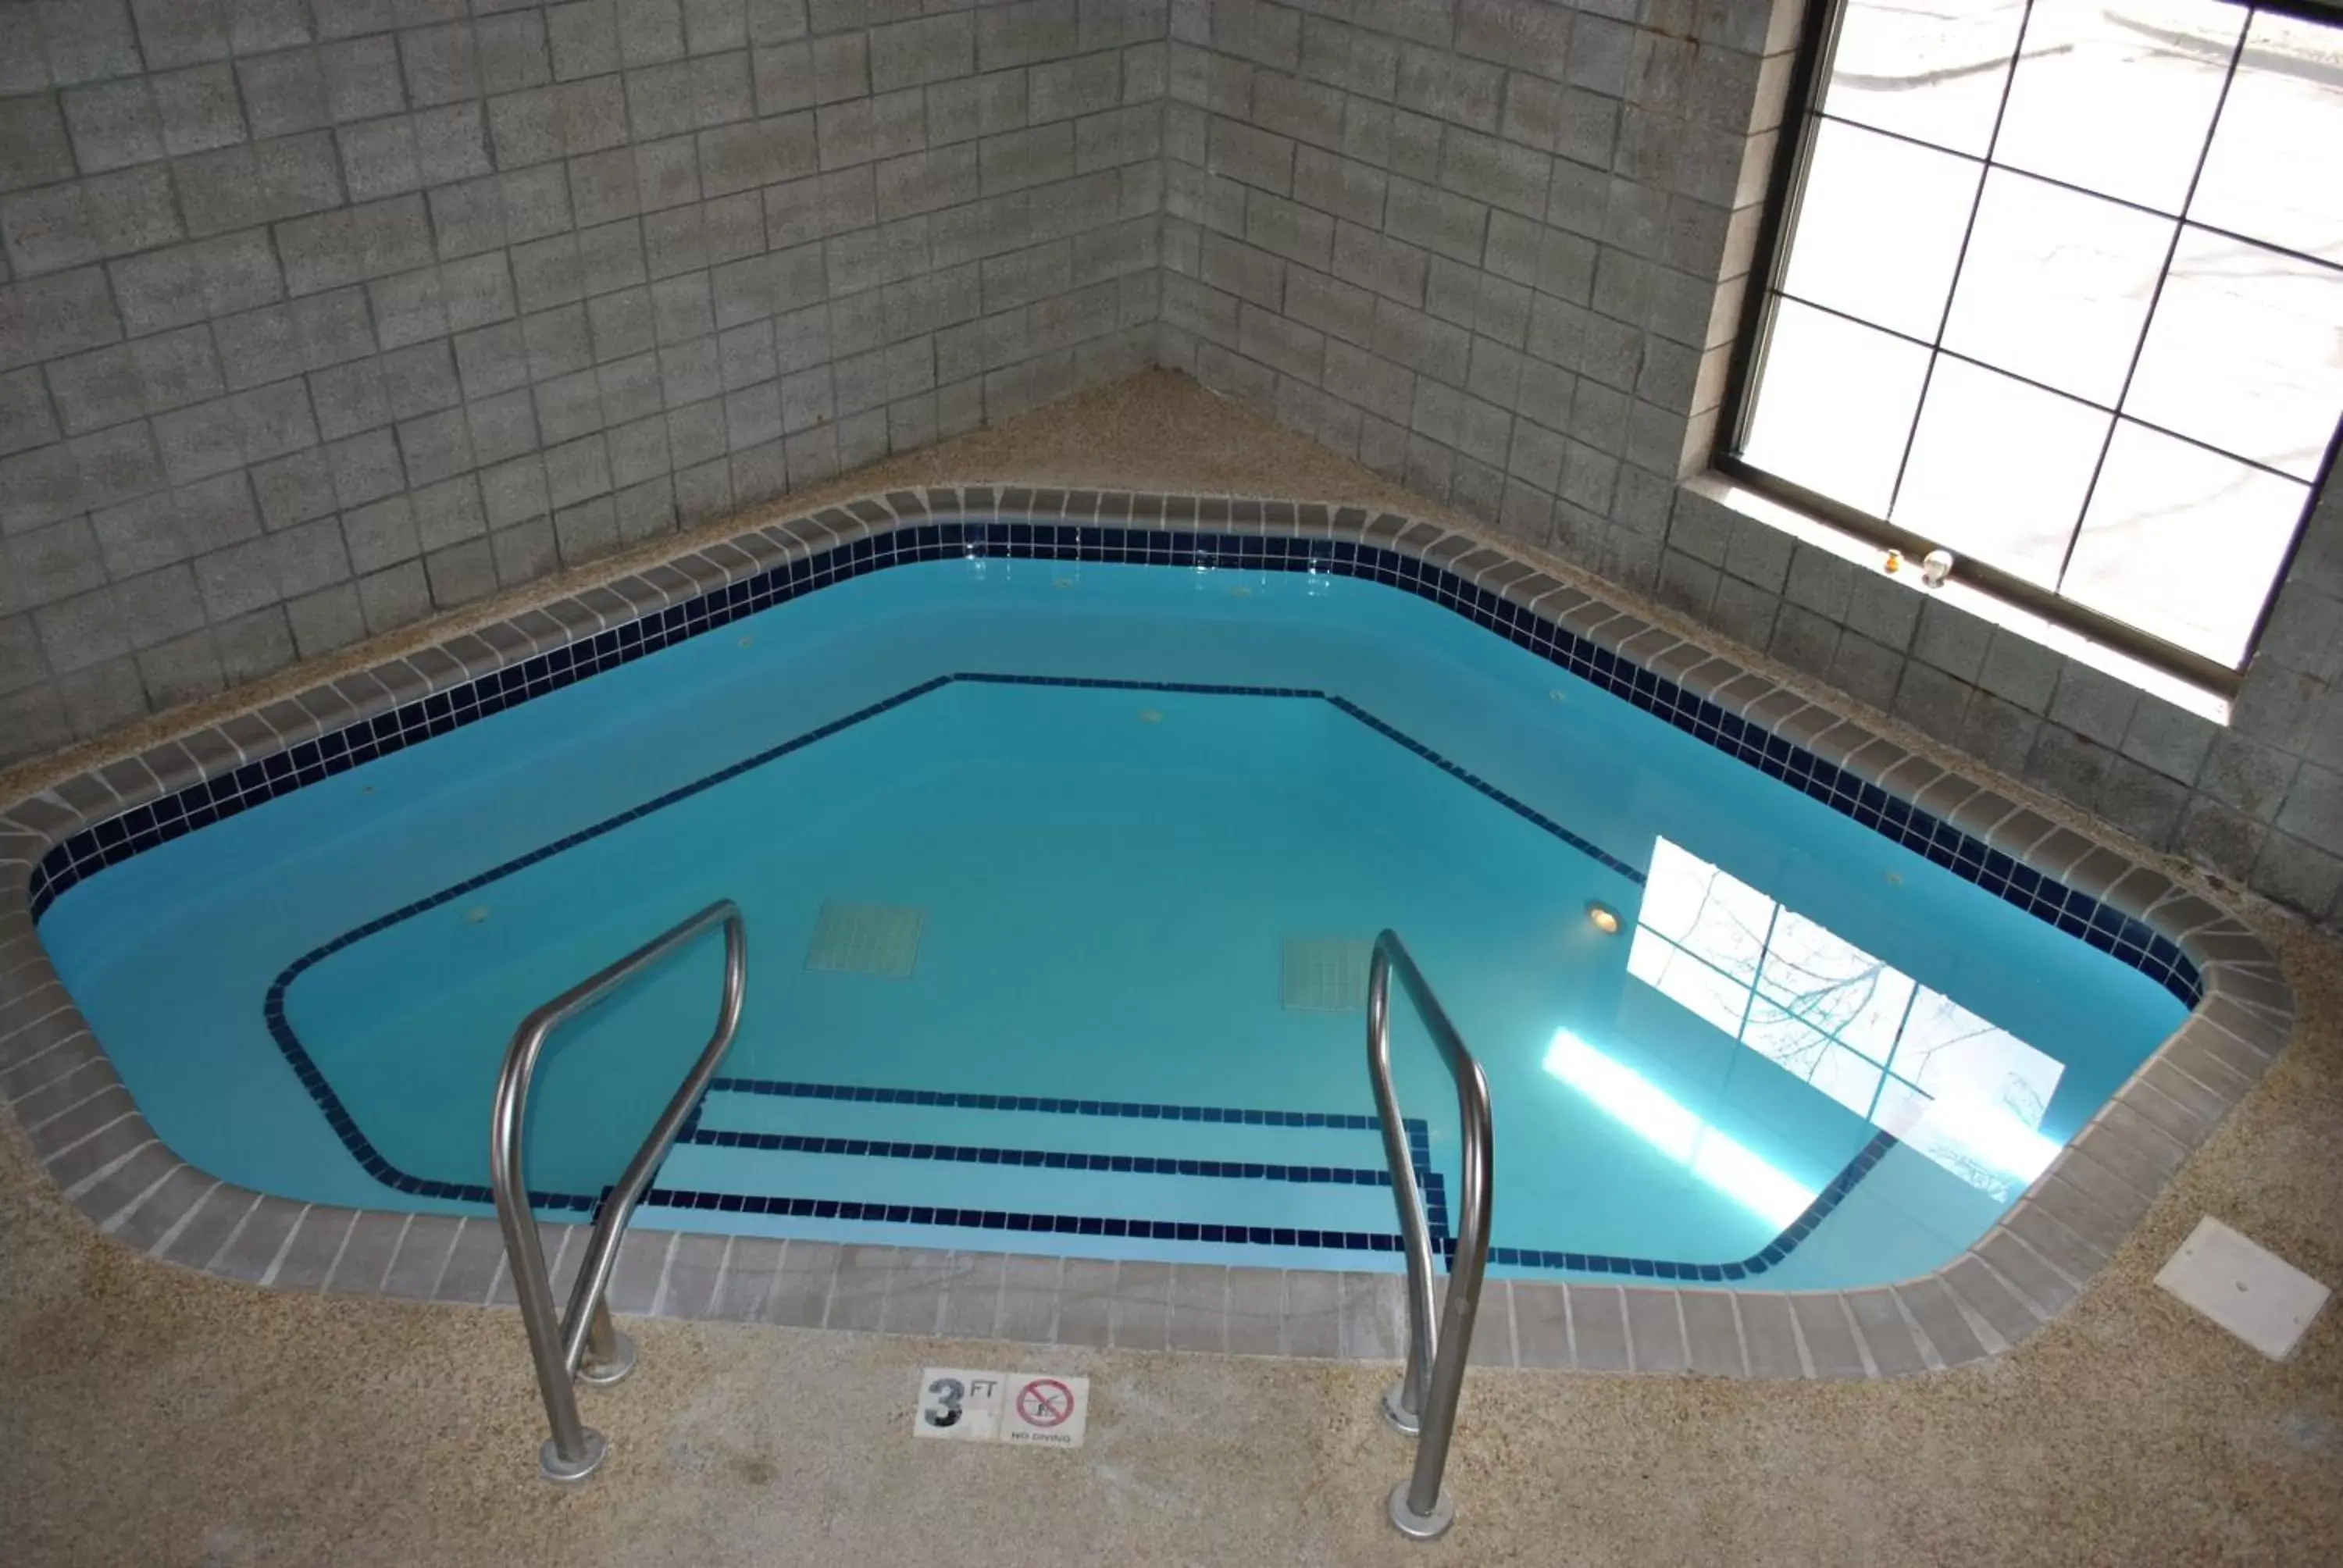 Hot Tub, Swimming Pool in AmericInn by Wyndham Hotel and Suites Long Lake